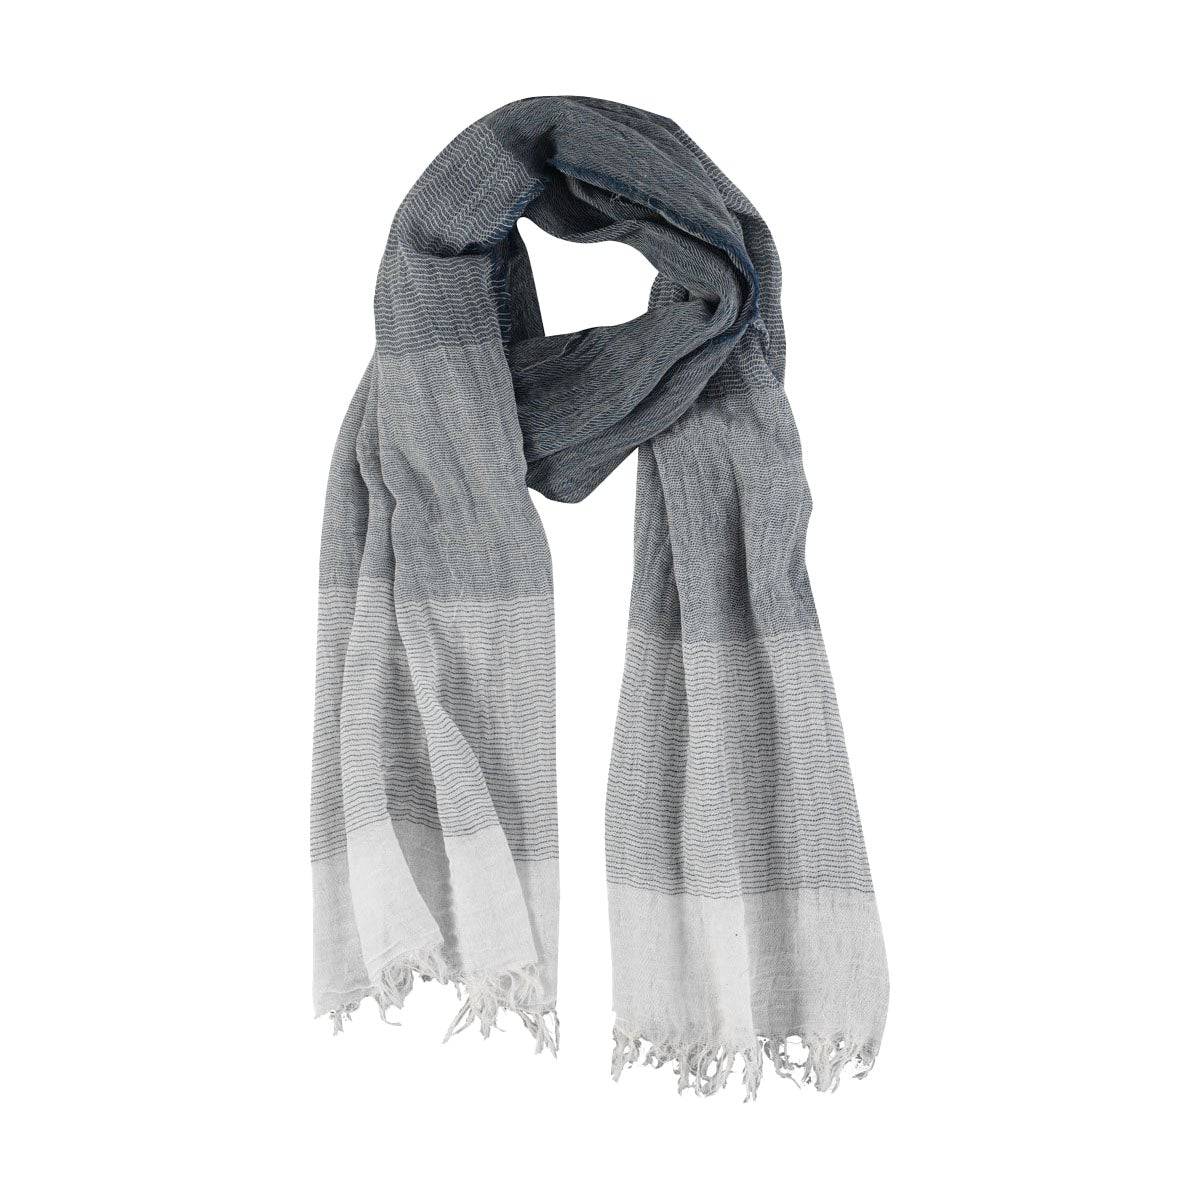 Men's and Women's Unisex Plaid Cashmere Feel Scarf Oversized Scarves Softer Than Cashmere Features Size 79" X 21.5"